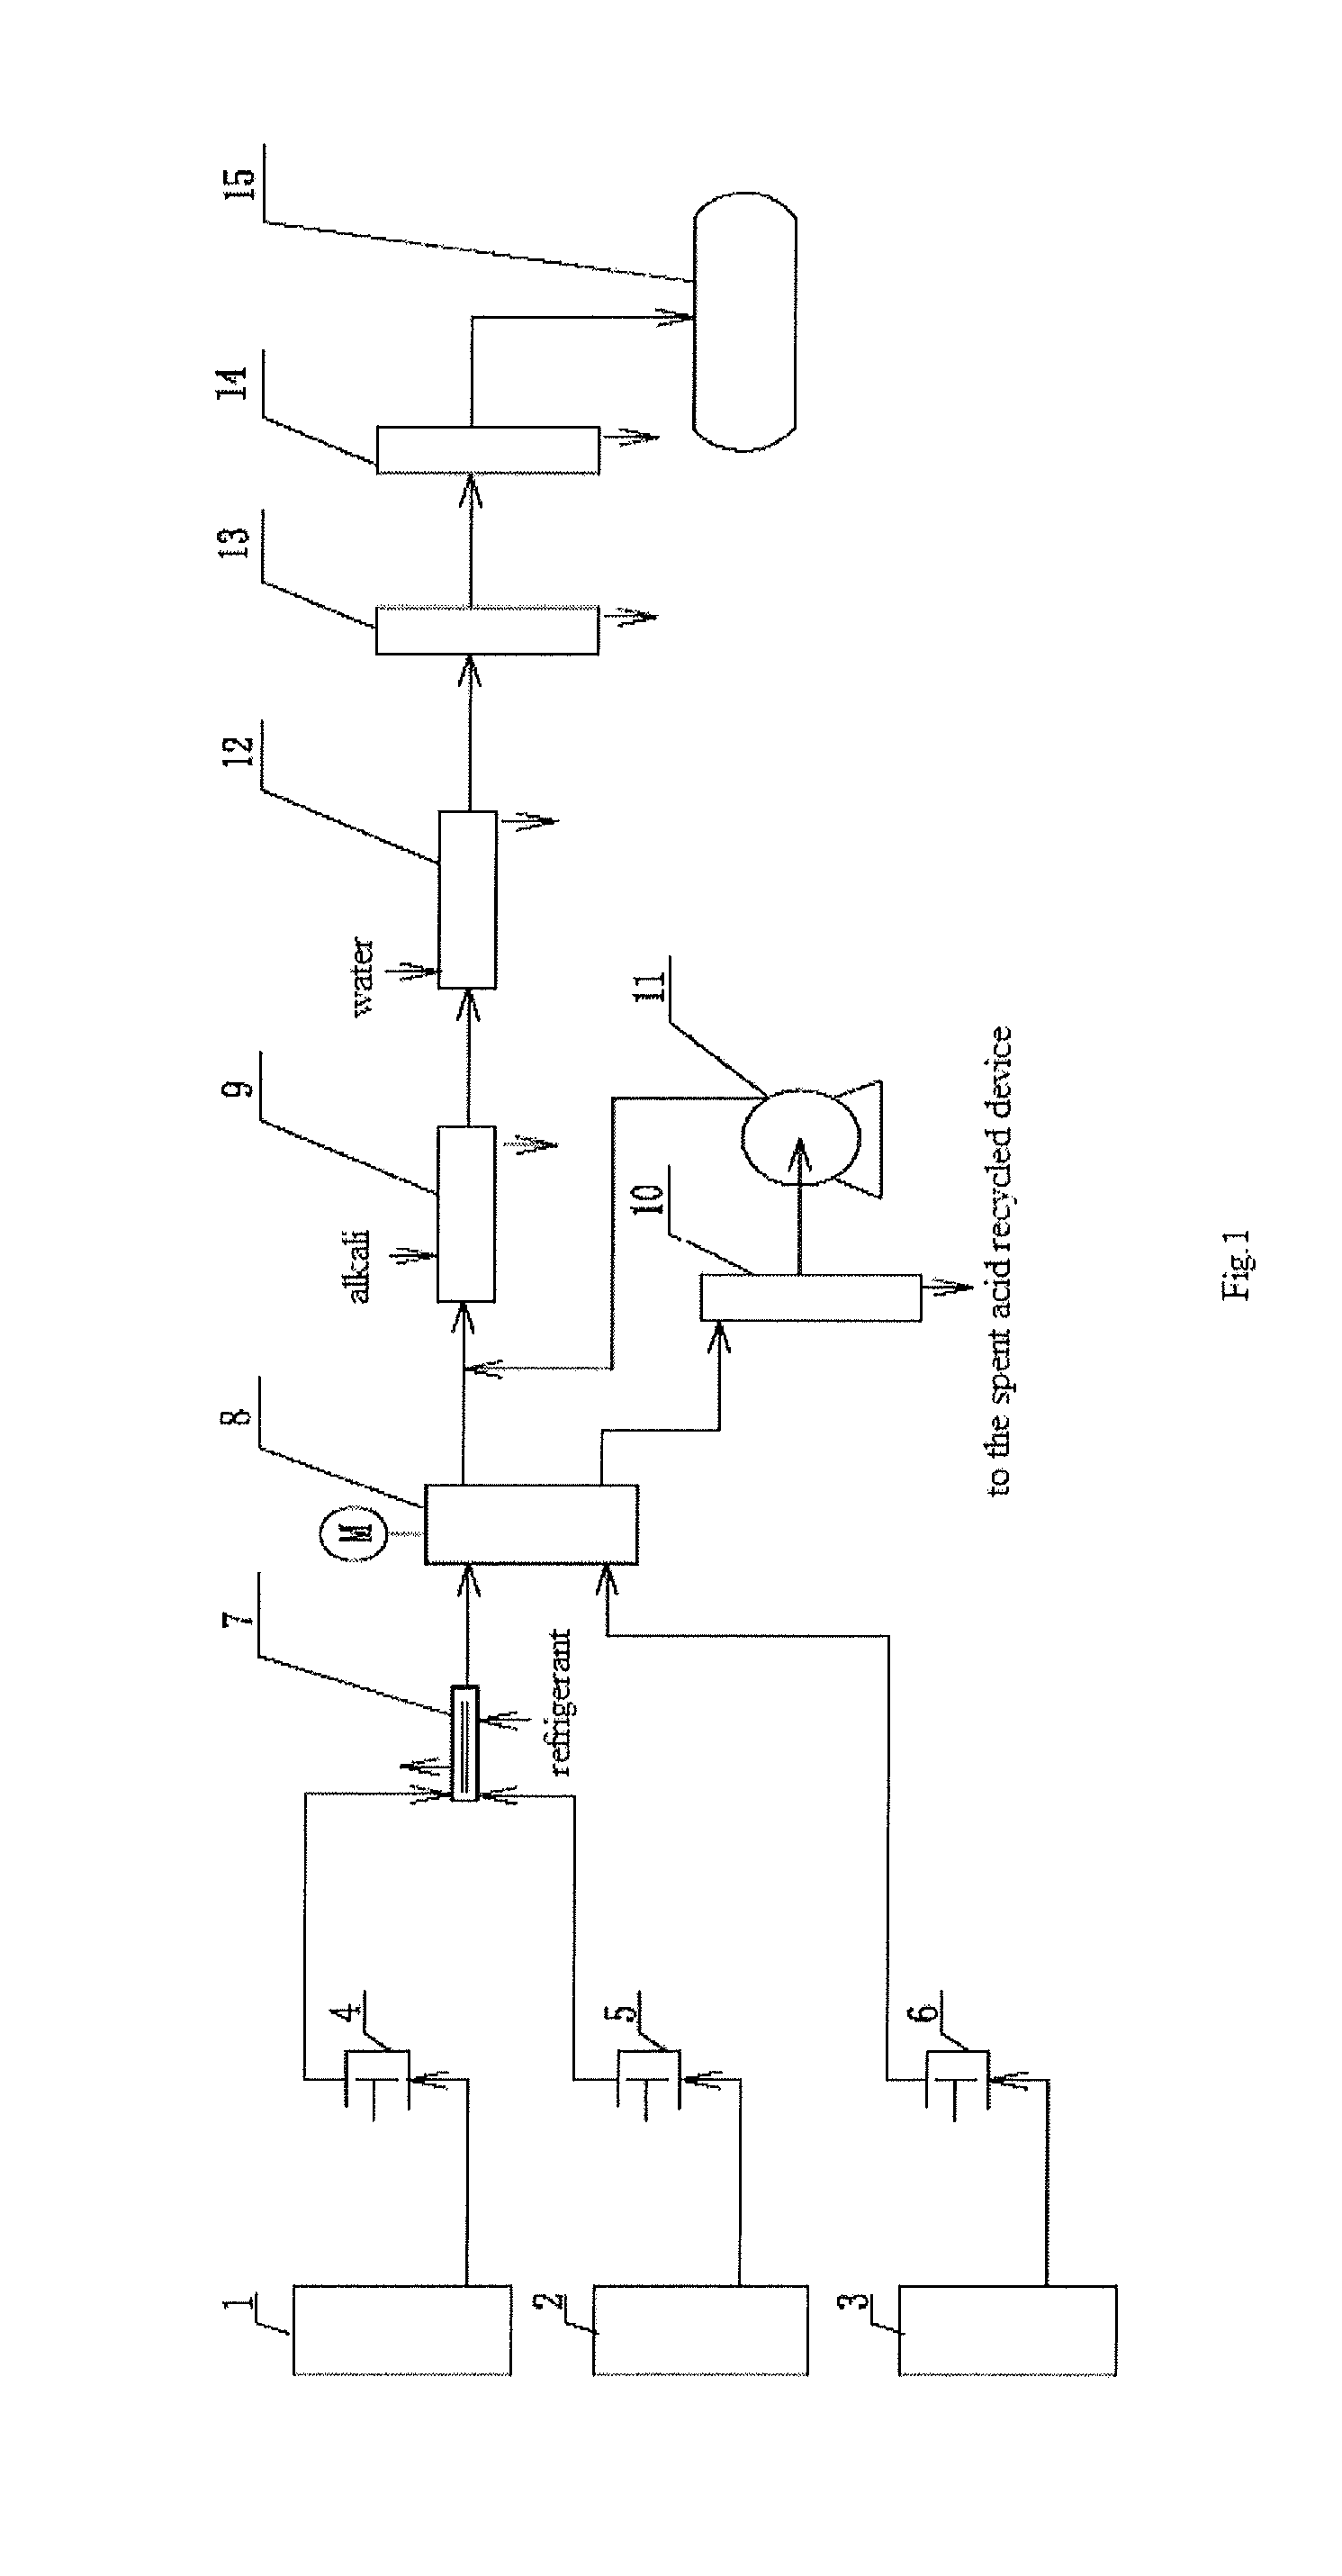 Safe method for producing alkyl nitrate